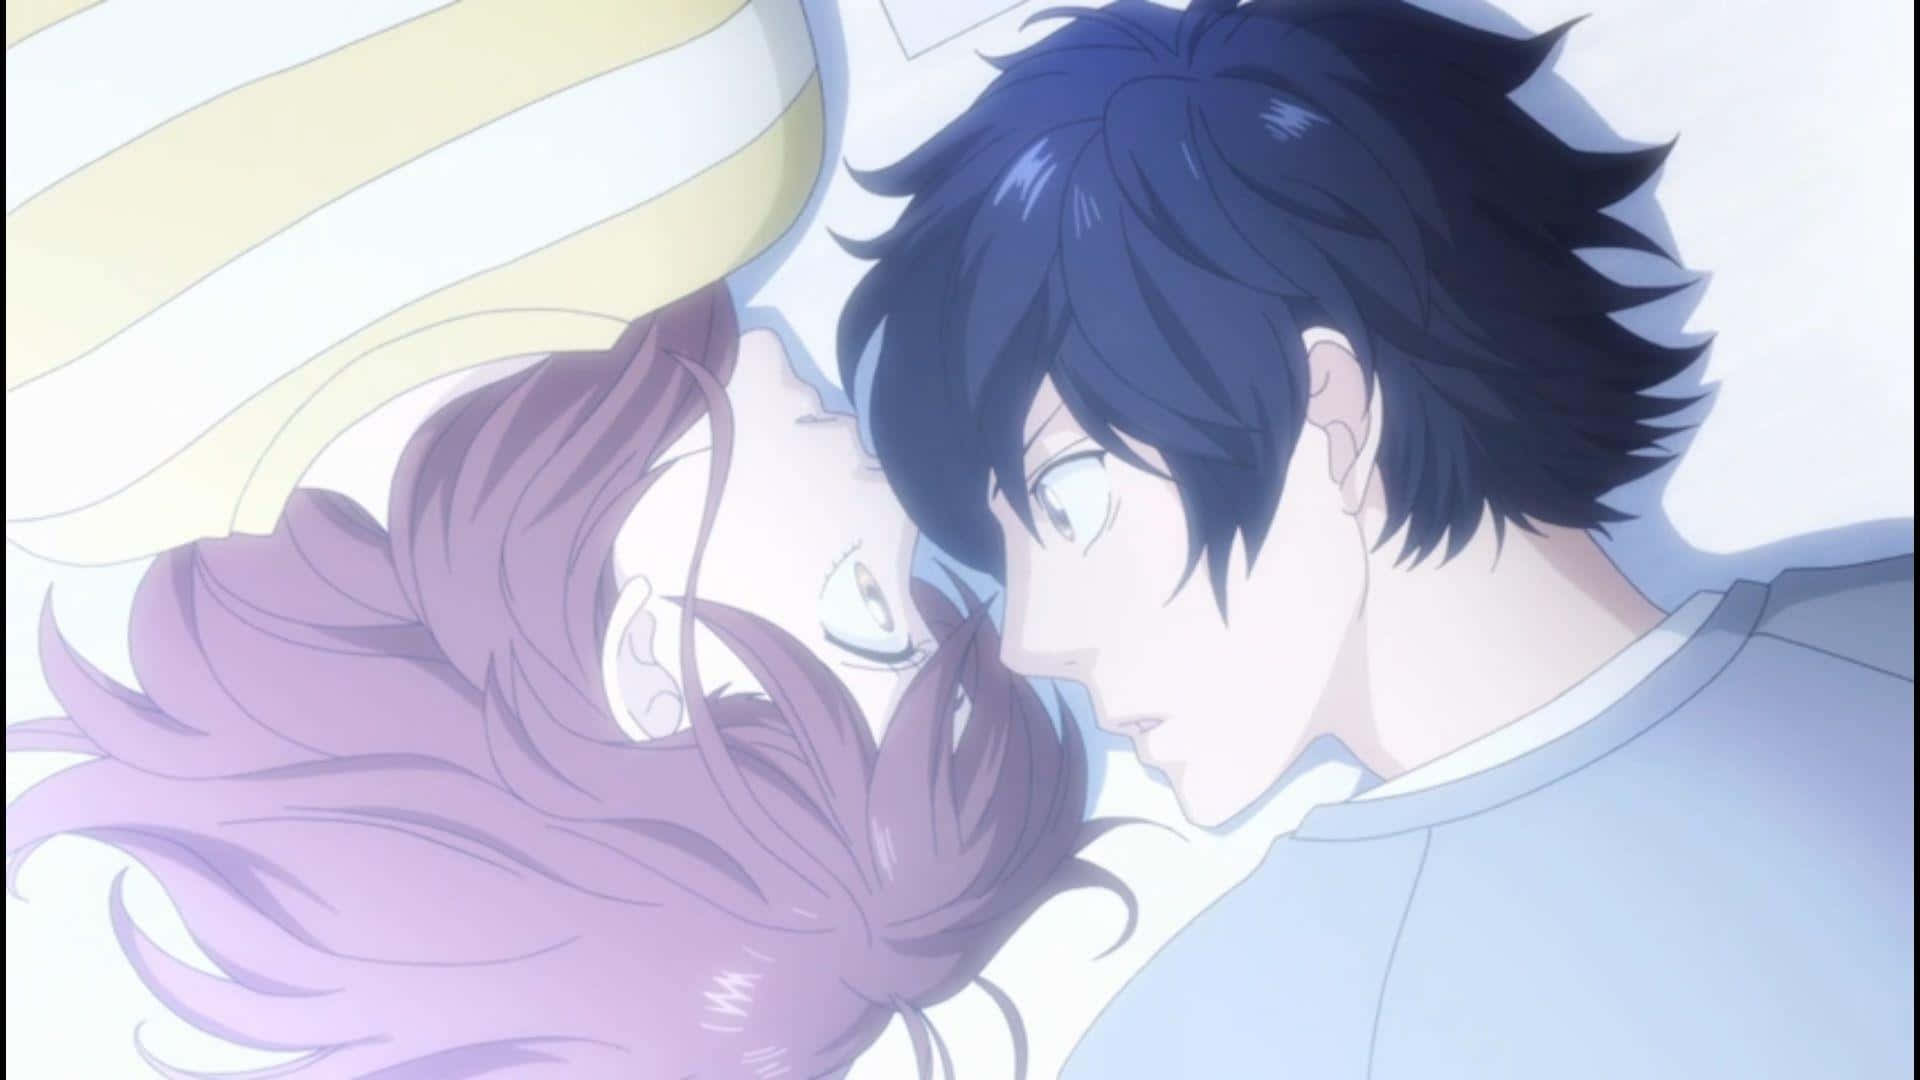 Follow the lead of Kou and Futaba as they experience the joys and heartaches of Ao Haru Ride